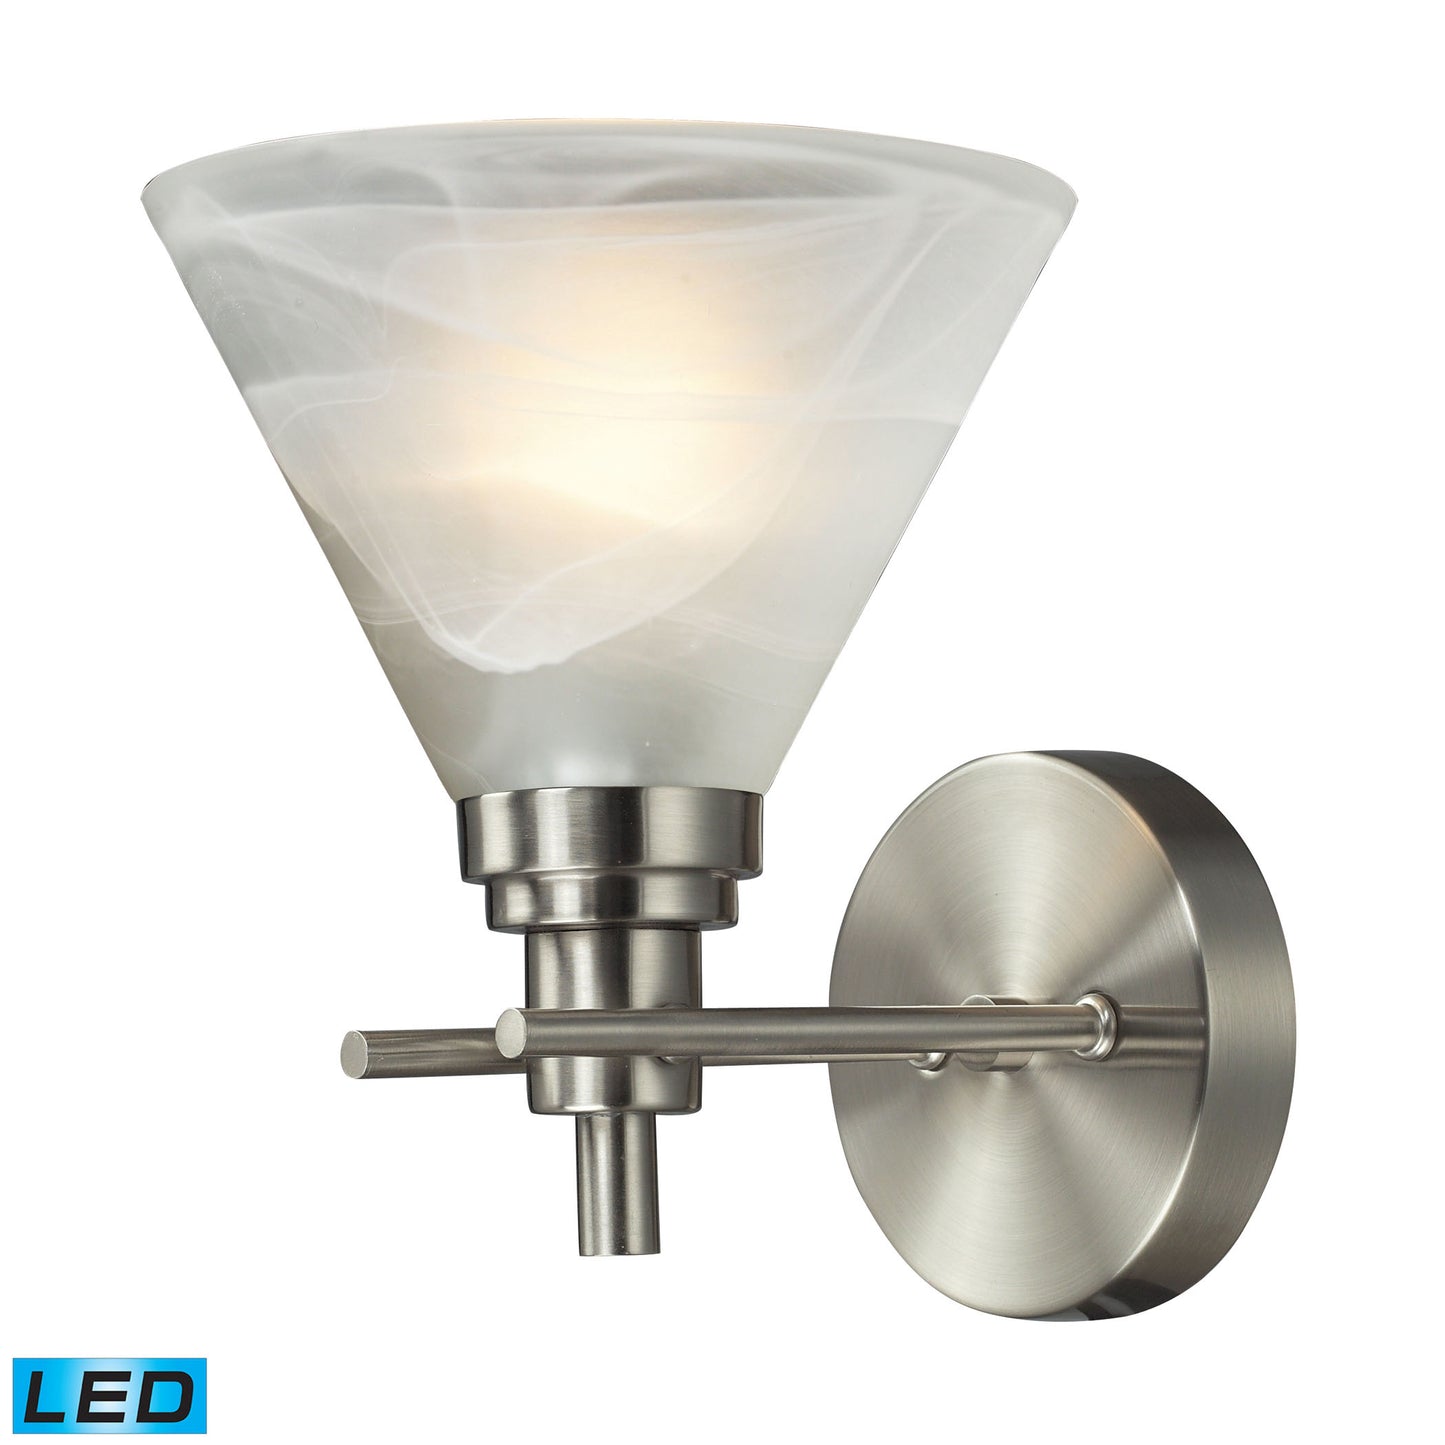 Pemberton 1-Light Vanity Lamp in Brushed Nickel with White Marbleized Glass - Includes LED Bulb